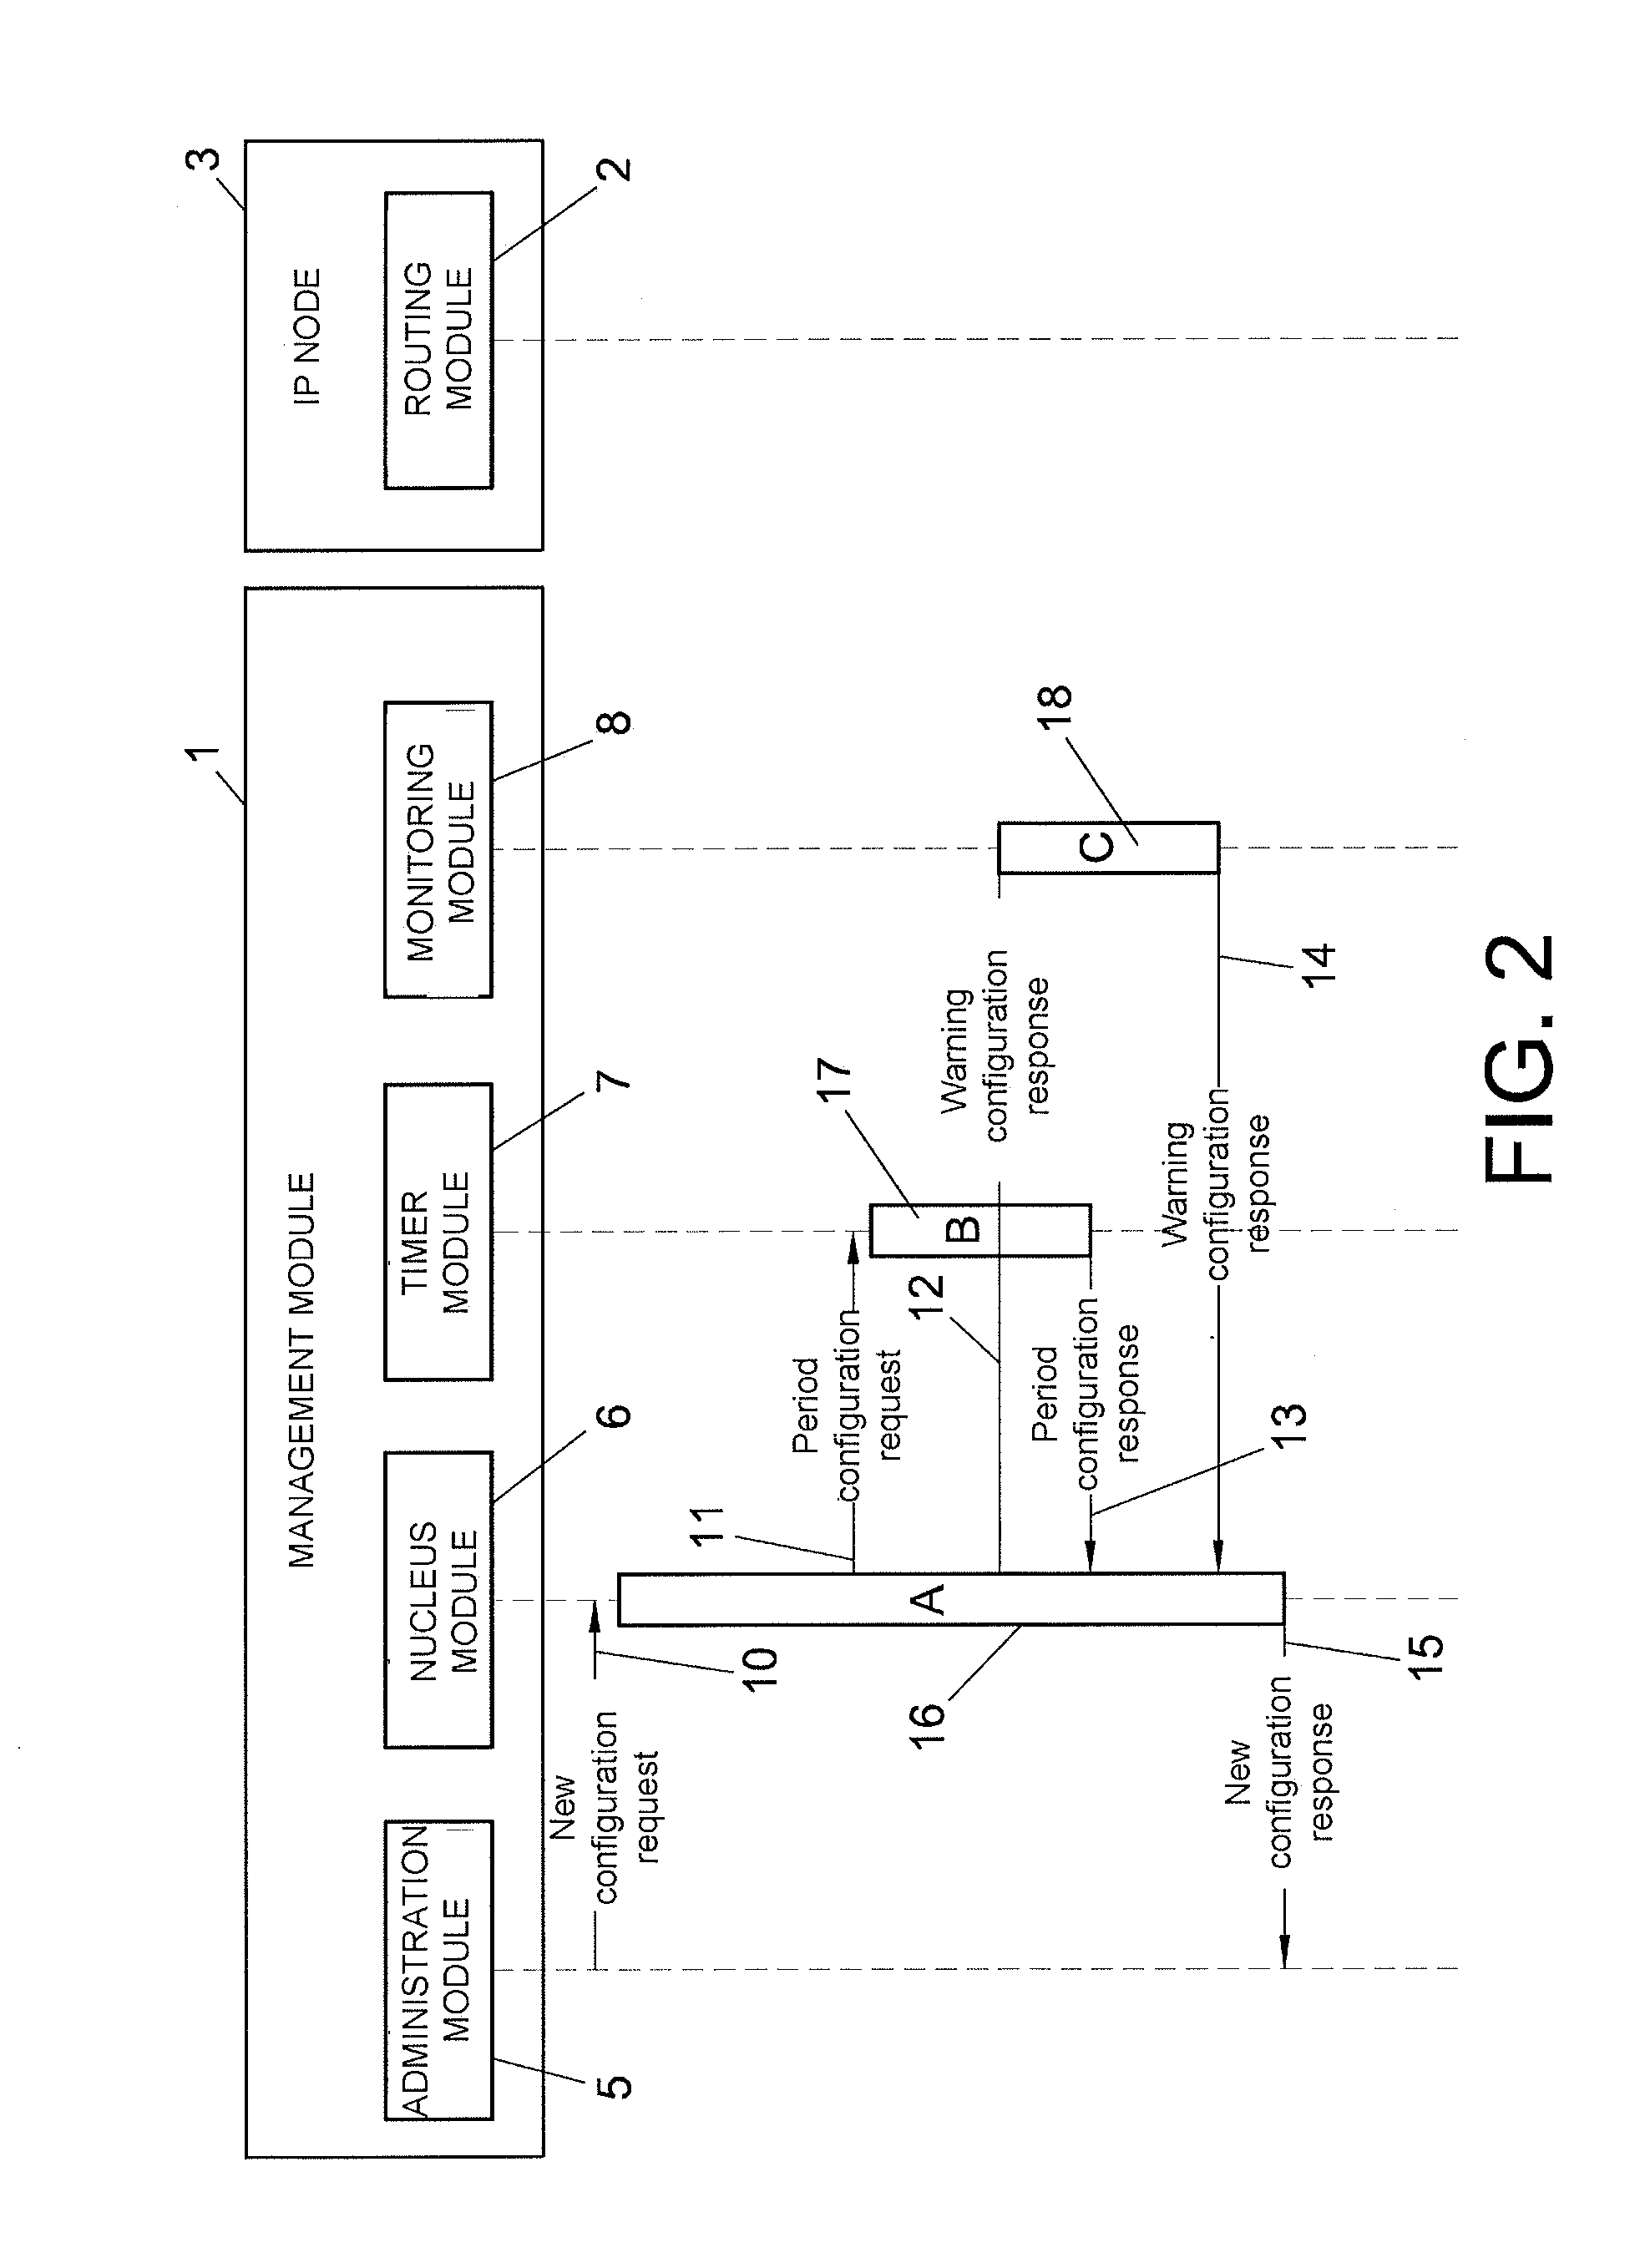 Method and system for managing high capacity traffic offload in an IP network nucleus in the transport layer